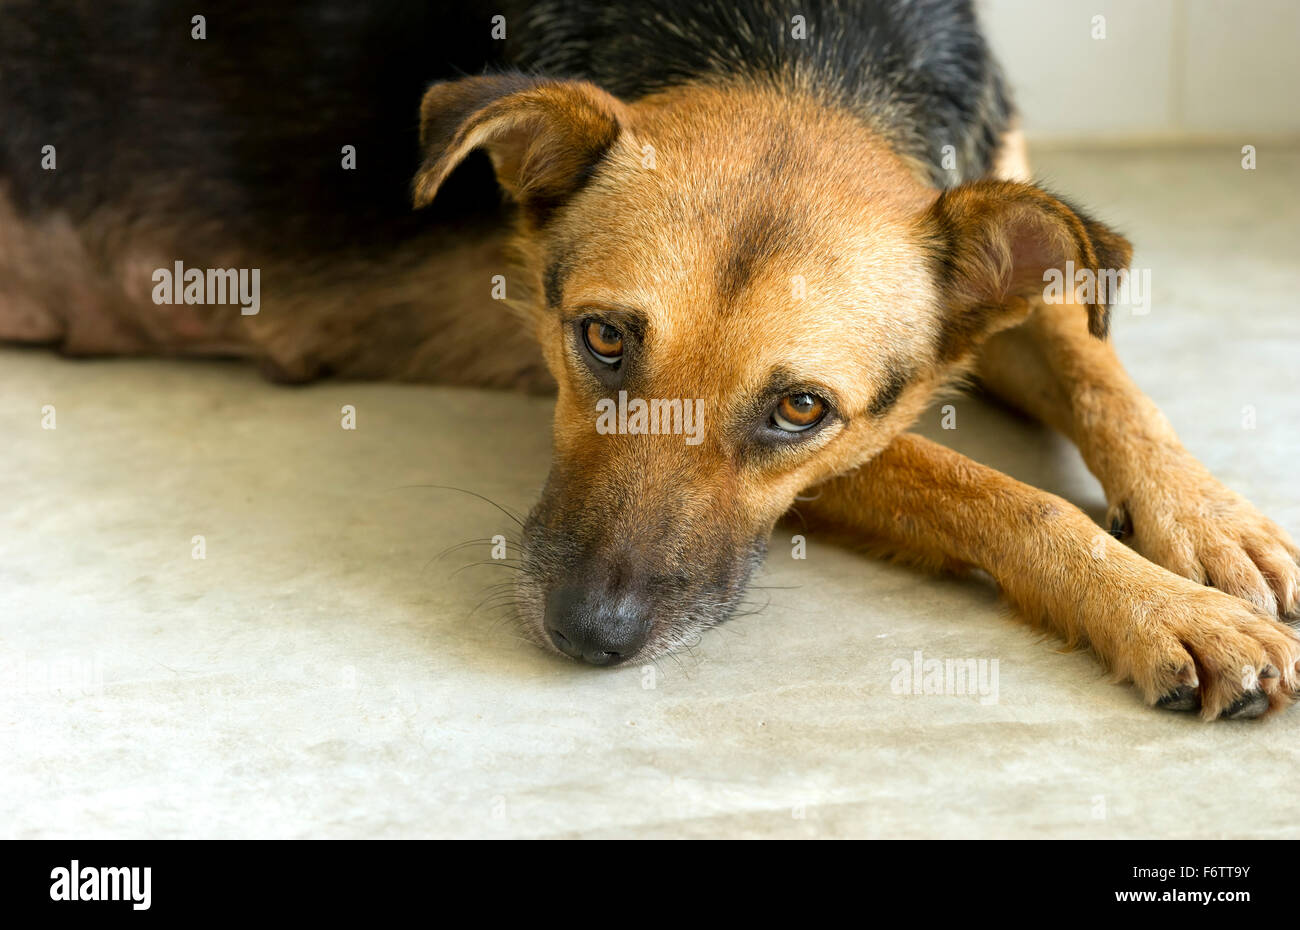 Sad dog is a shelter dog looking sad and disheartened hoping someone will take him home and love him. Stock Photo